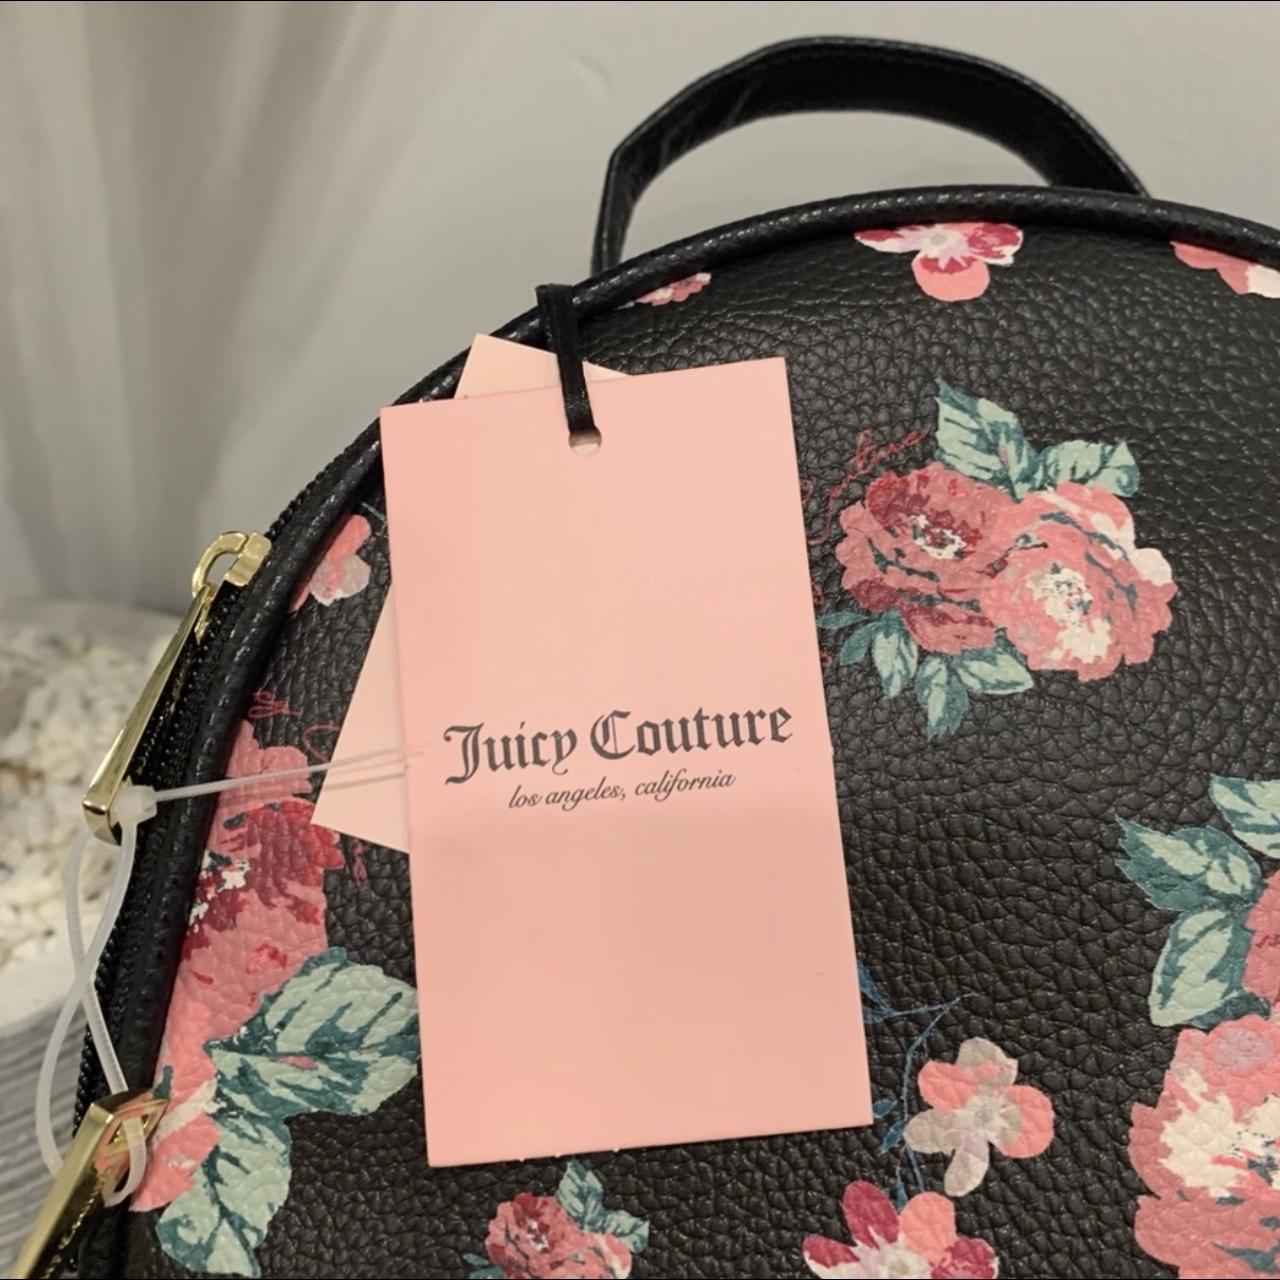 NWT Juicy Couture Floral Backpack Inside And Outside Pockets Lightweight